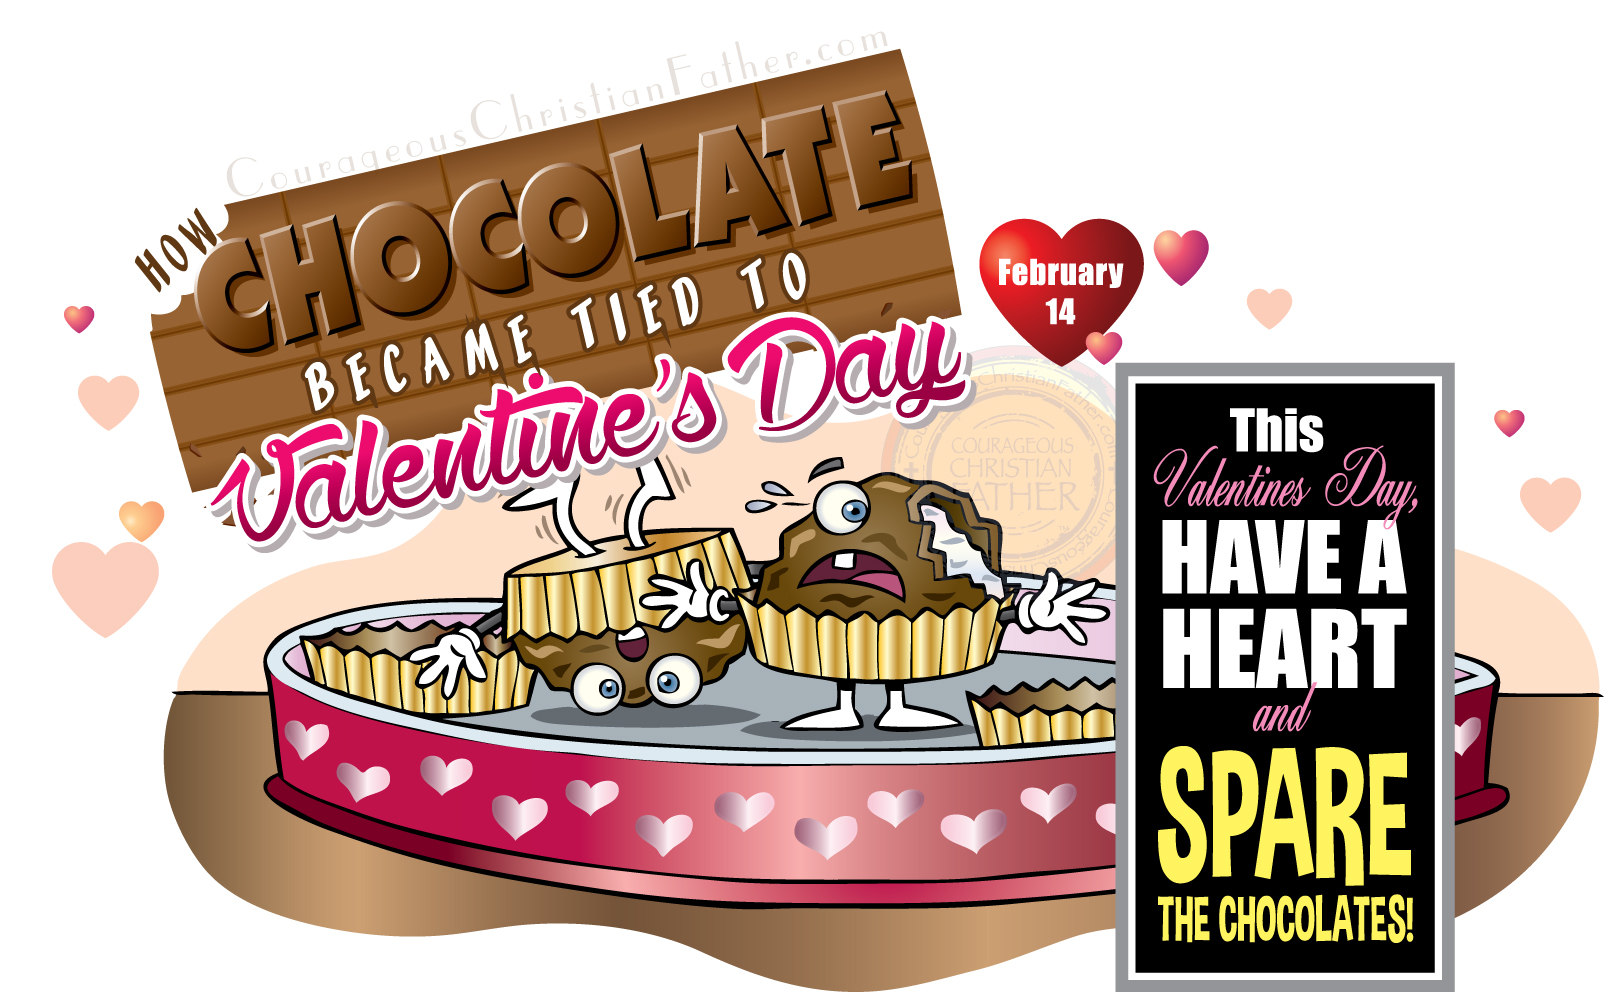 This Valentine's Day have a heart and spare the chocolates! (How Chocolate Became Tied to Valentine's Day)